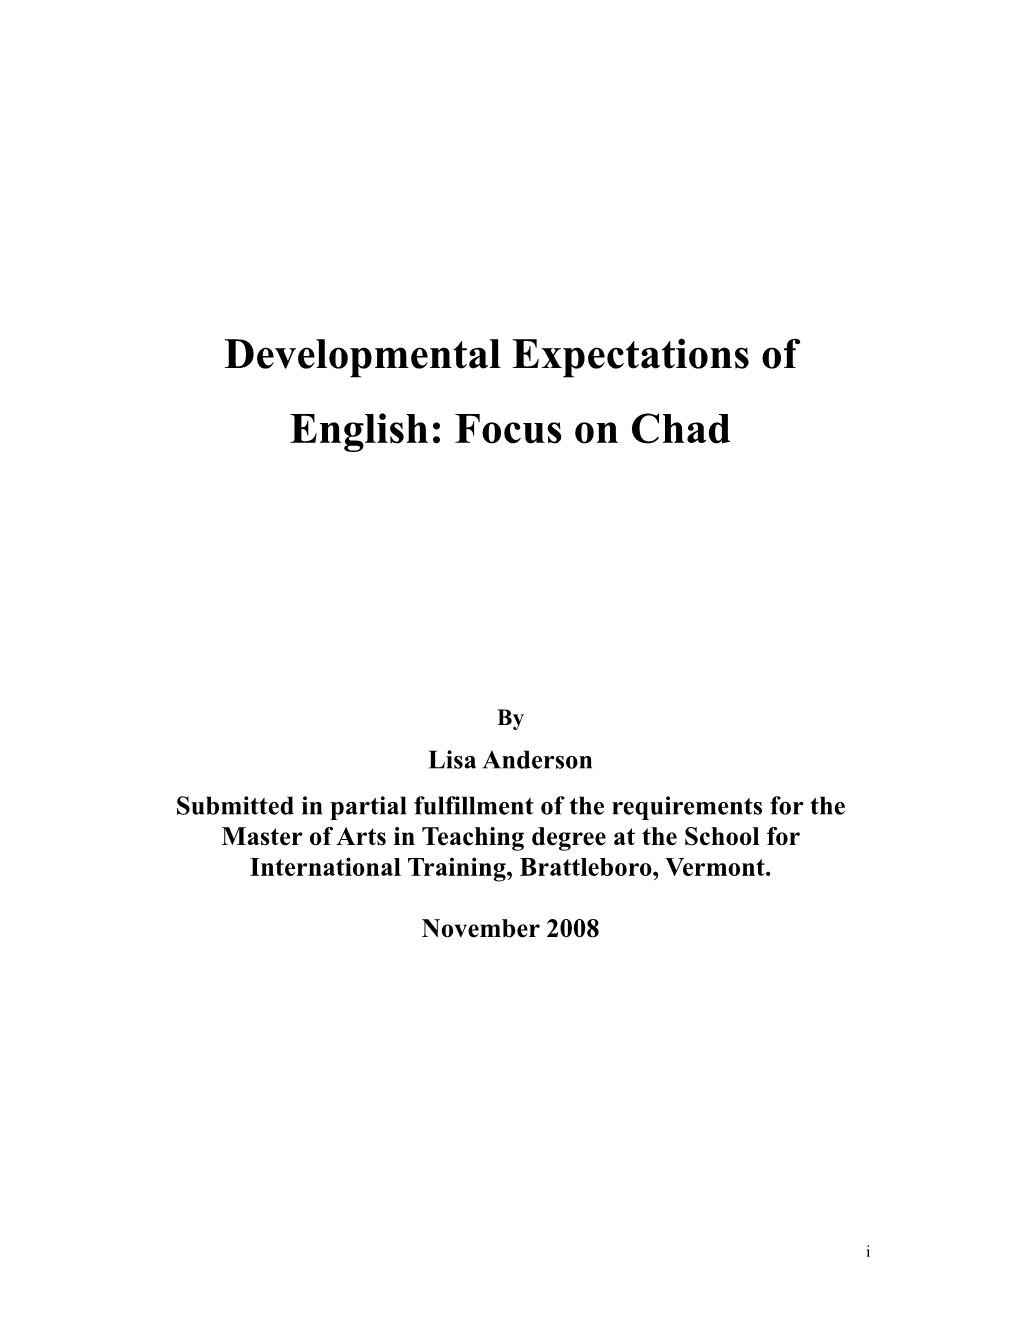 Developmental Expectations of English: Focus on Chad